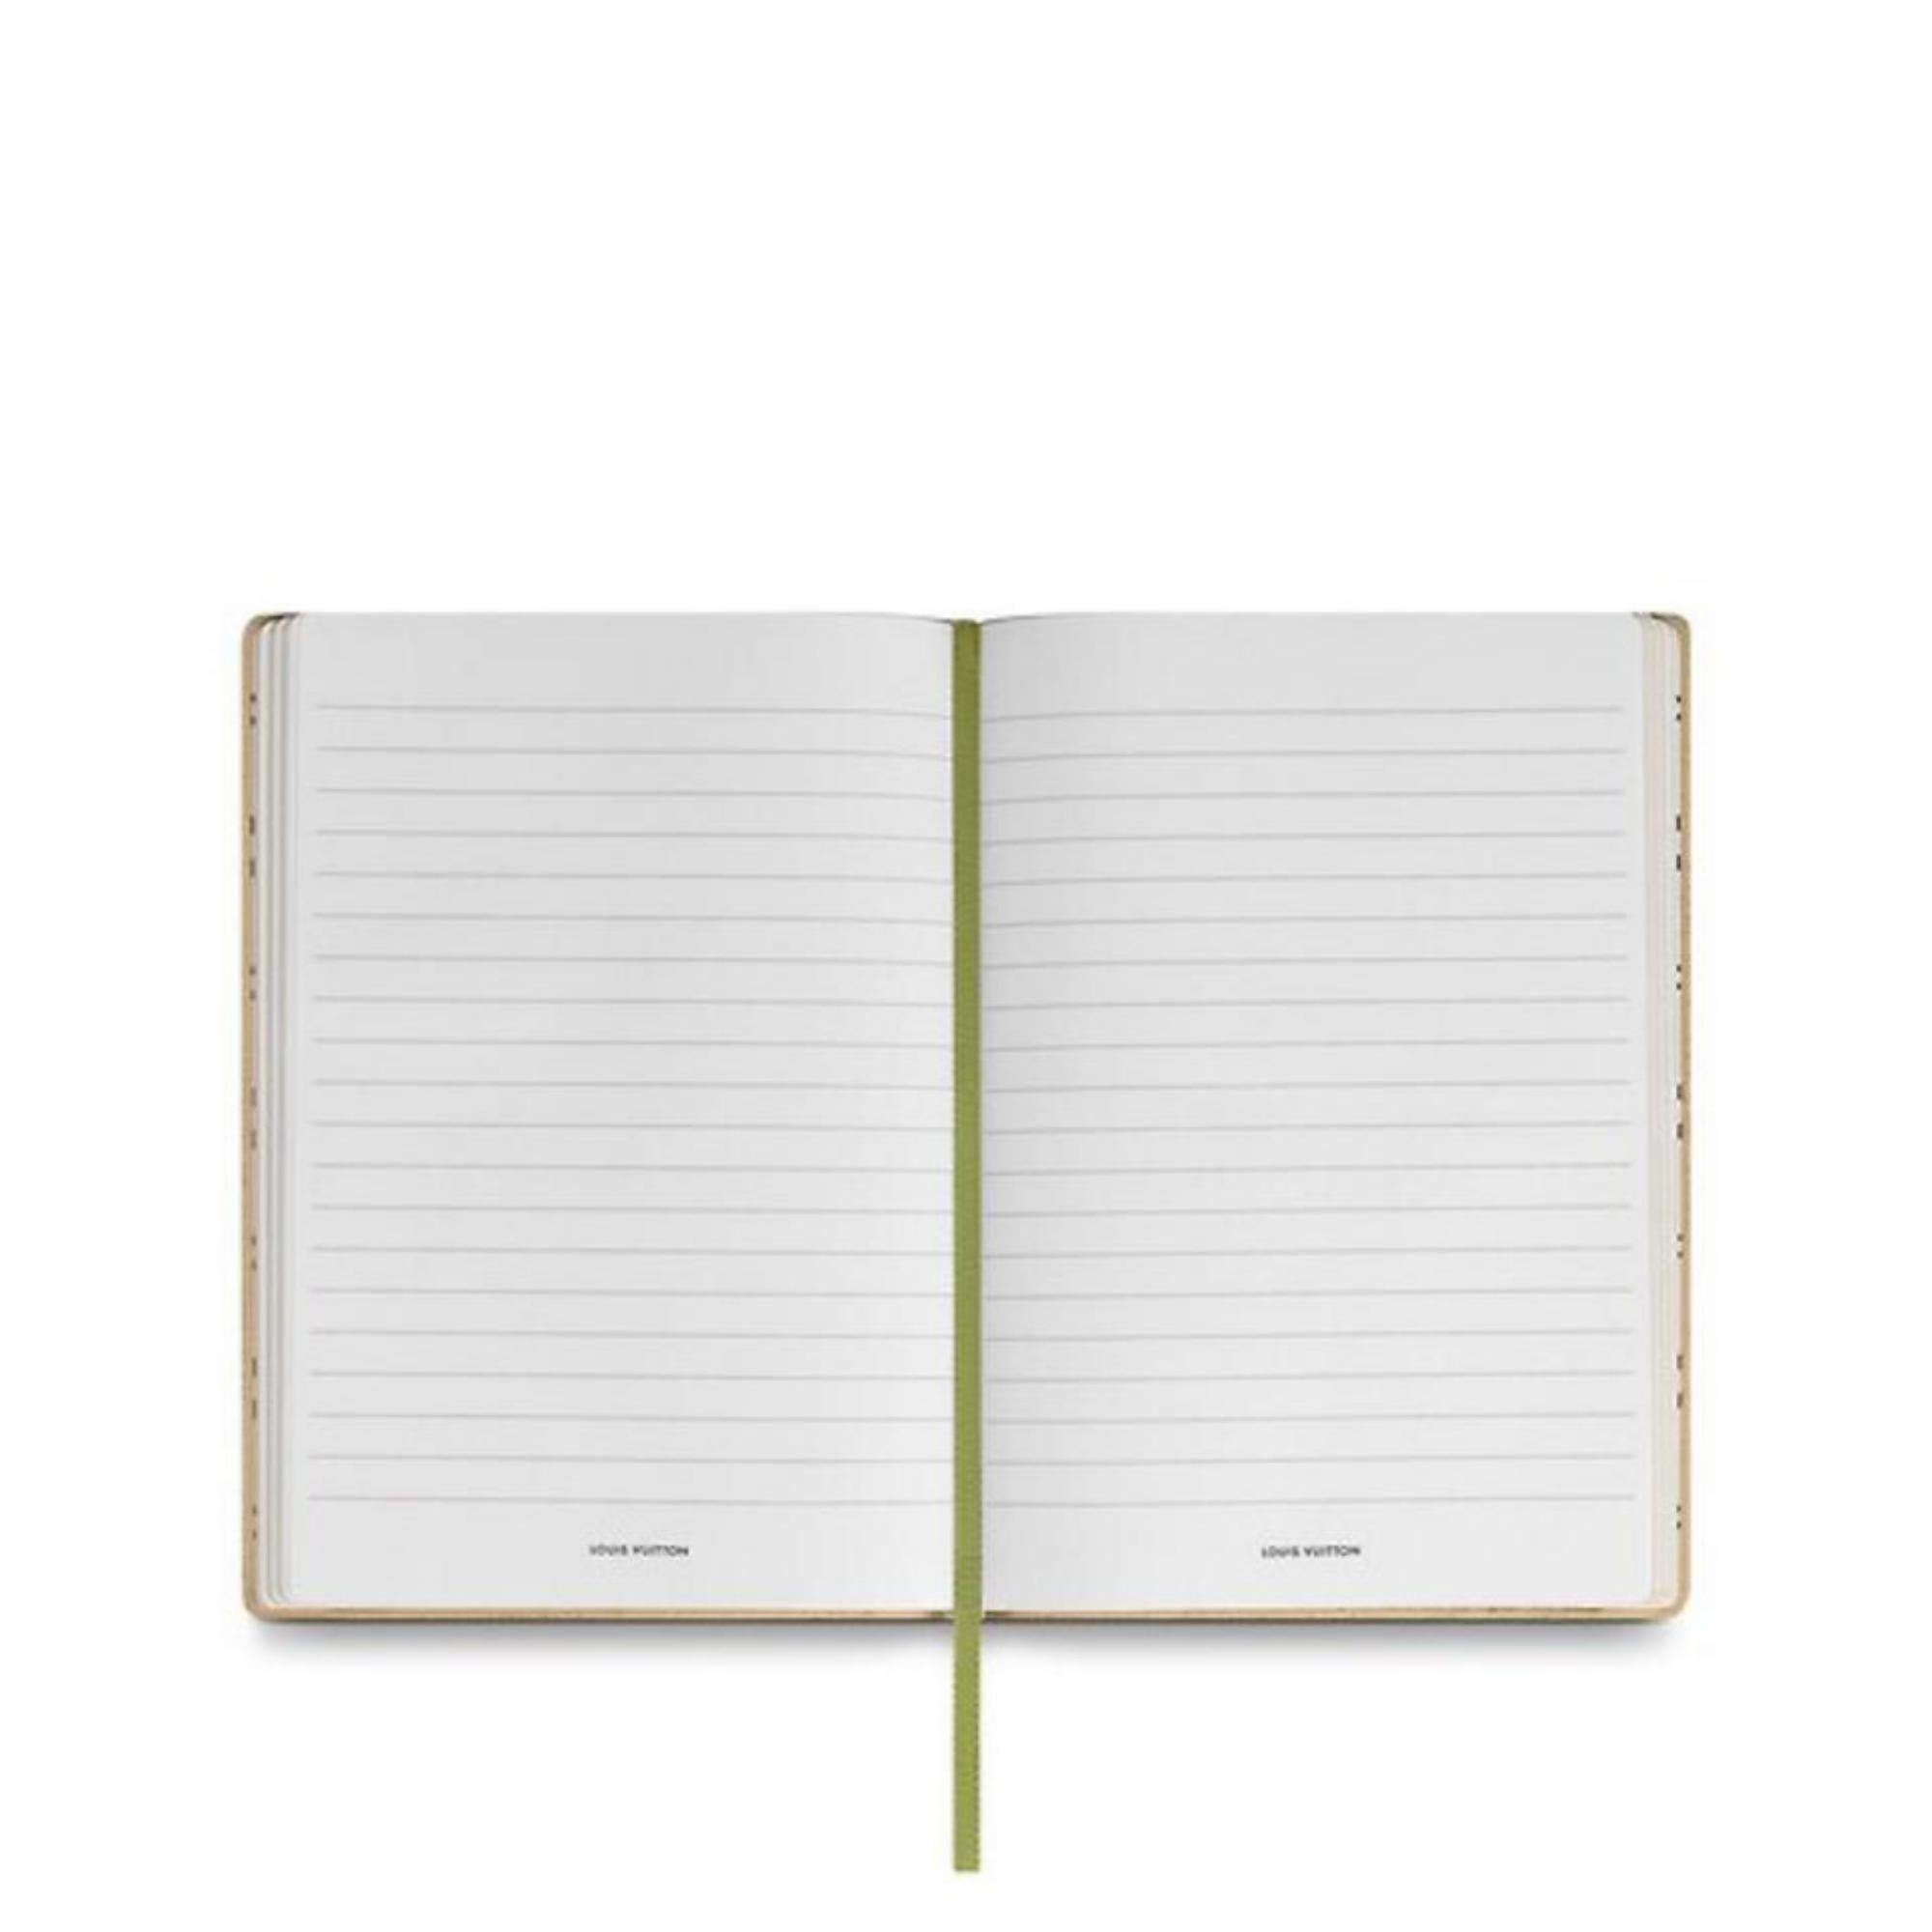 Louis Vuitton Green Khaki Beige Monogram Giant Gustave Notebook Mm 870615 In New Condition For Sale In Forest Hills, NY